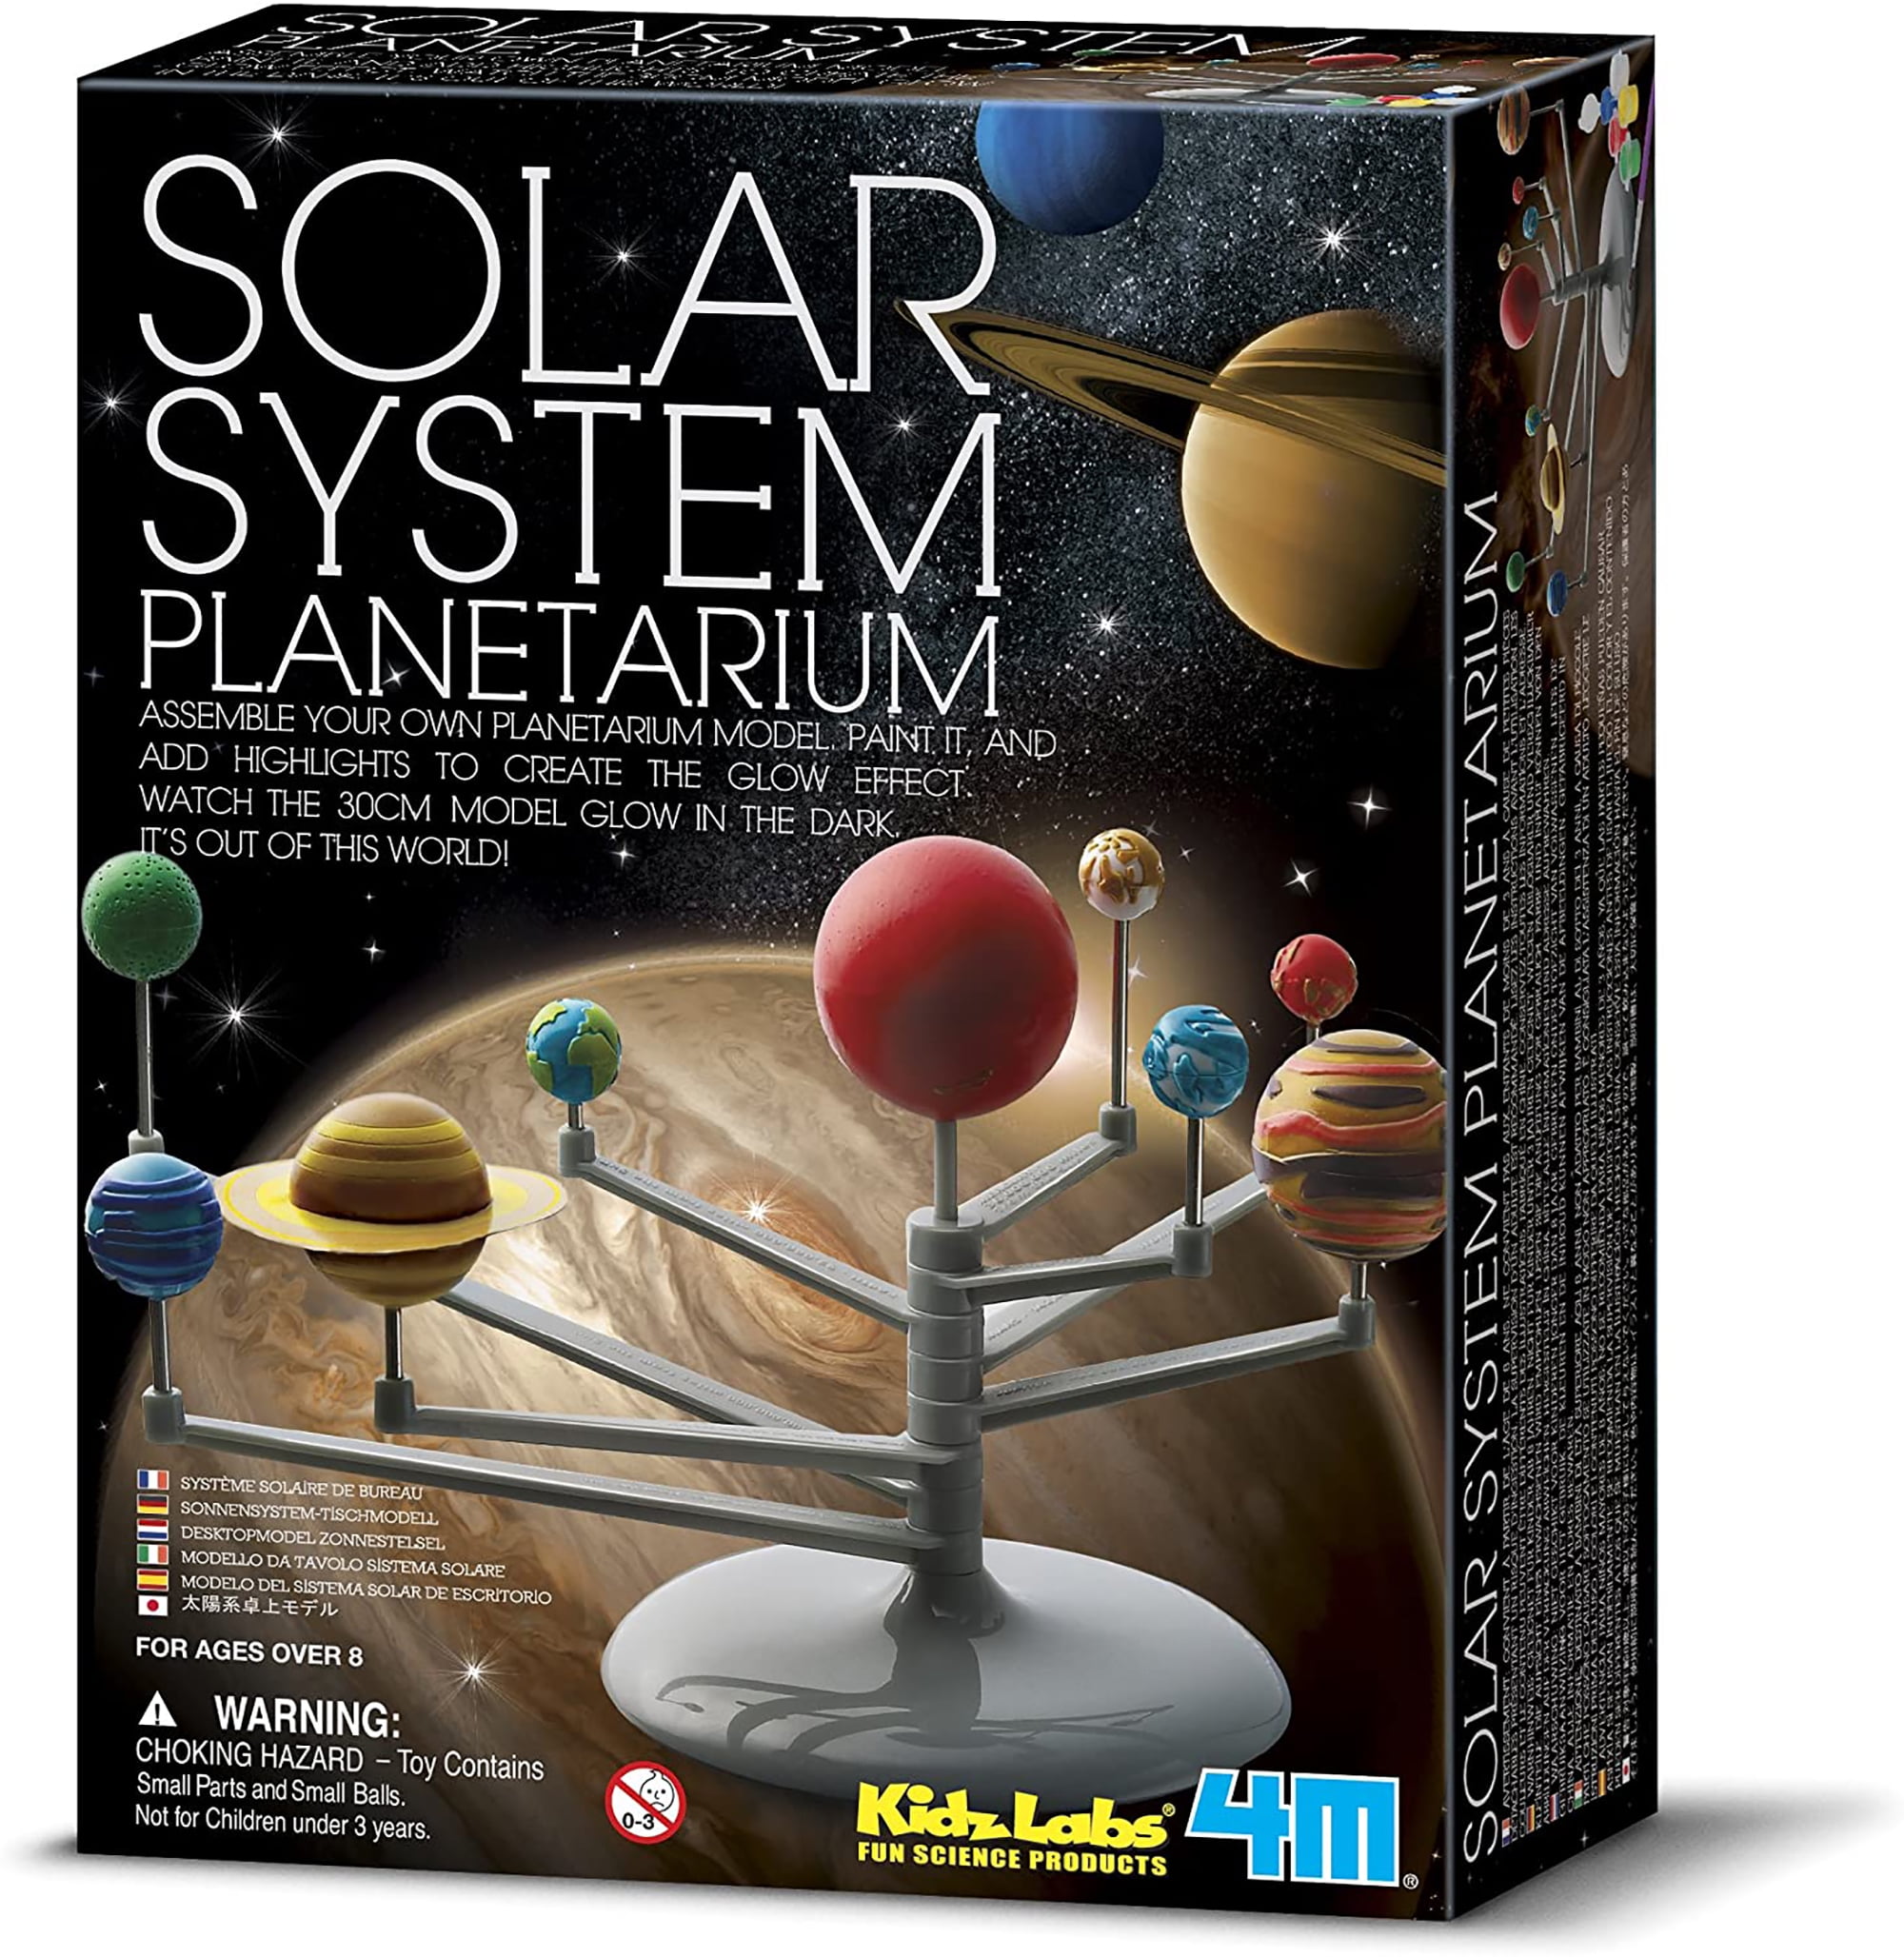 Gptoys 3 in 1 Build and Paint Solar System for Kids, Arts and Crafts Science Kits for Kids Age 4-6-8-12, Glow in The Dark Movable 3D Planets in